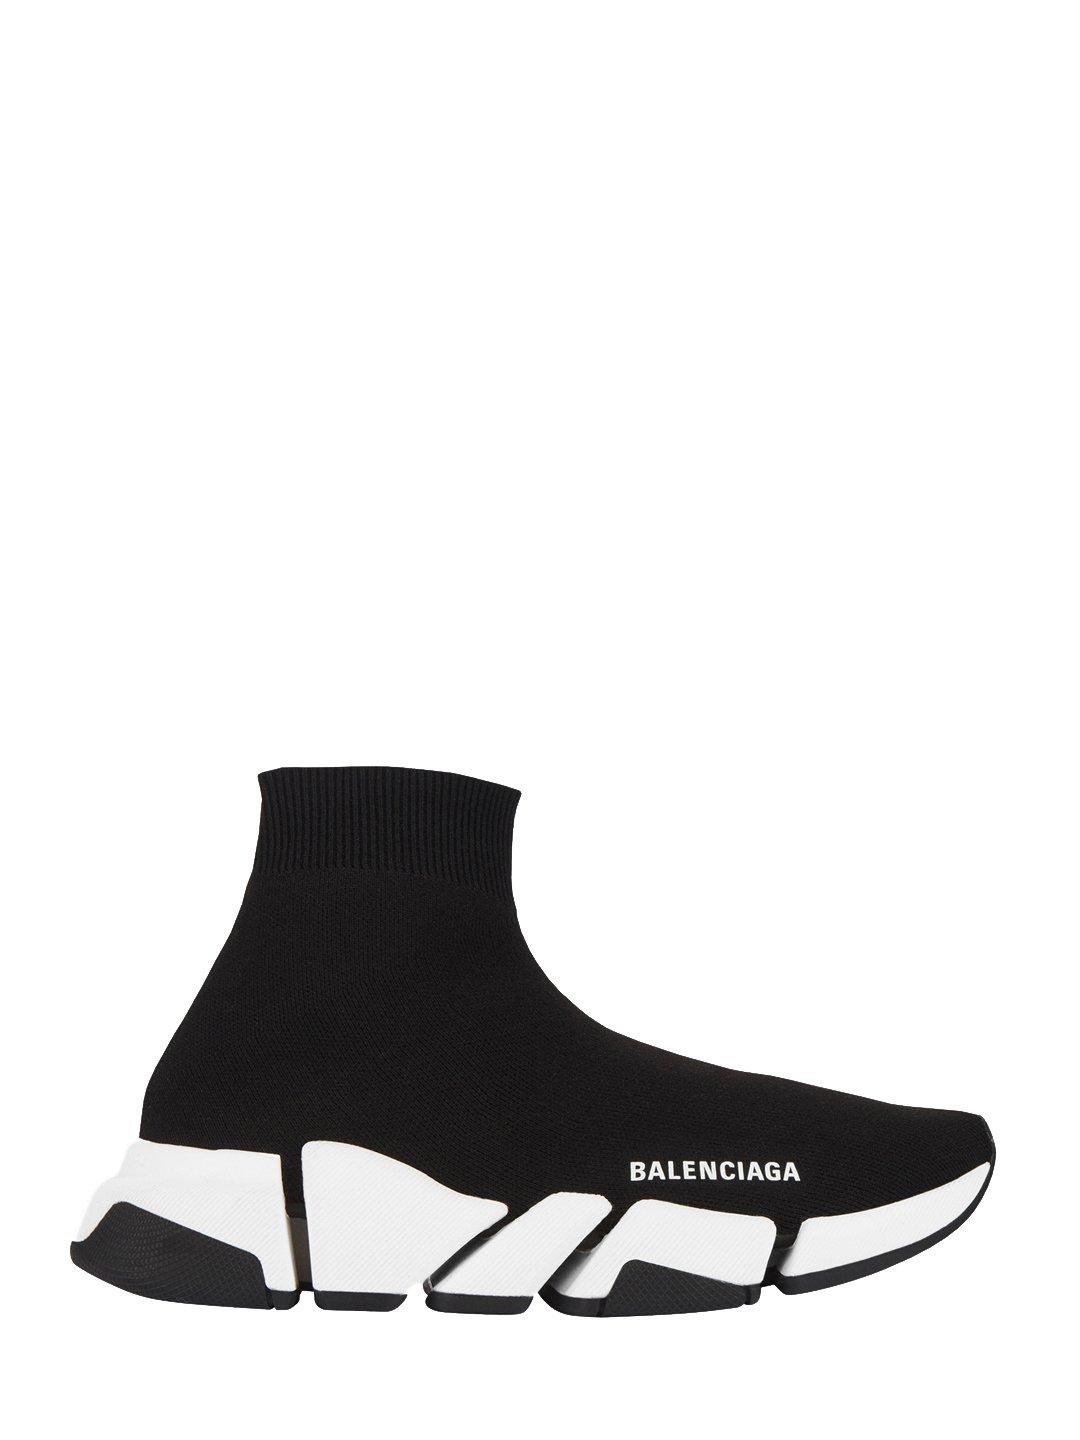 Balenciaga Synthetic Speed 2.0 Sneakers in Black - Lyst